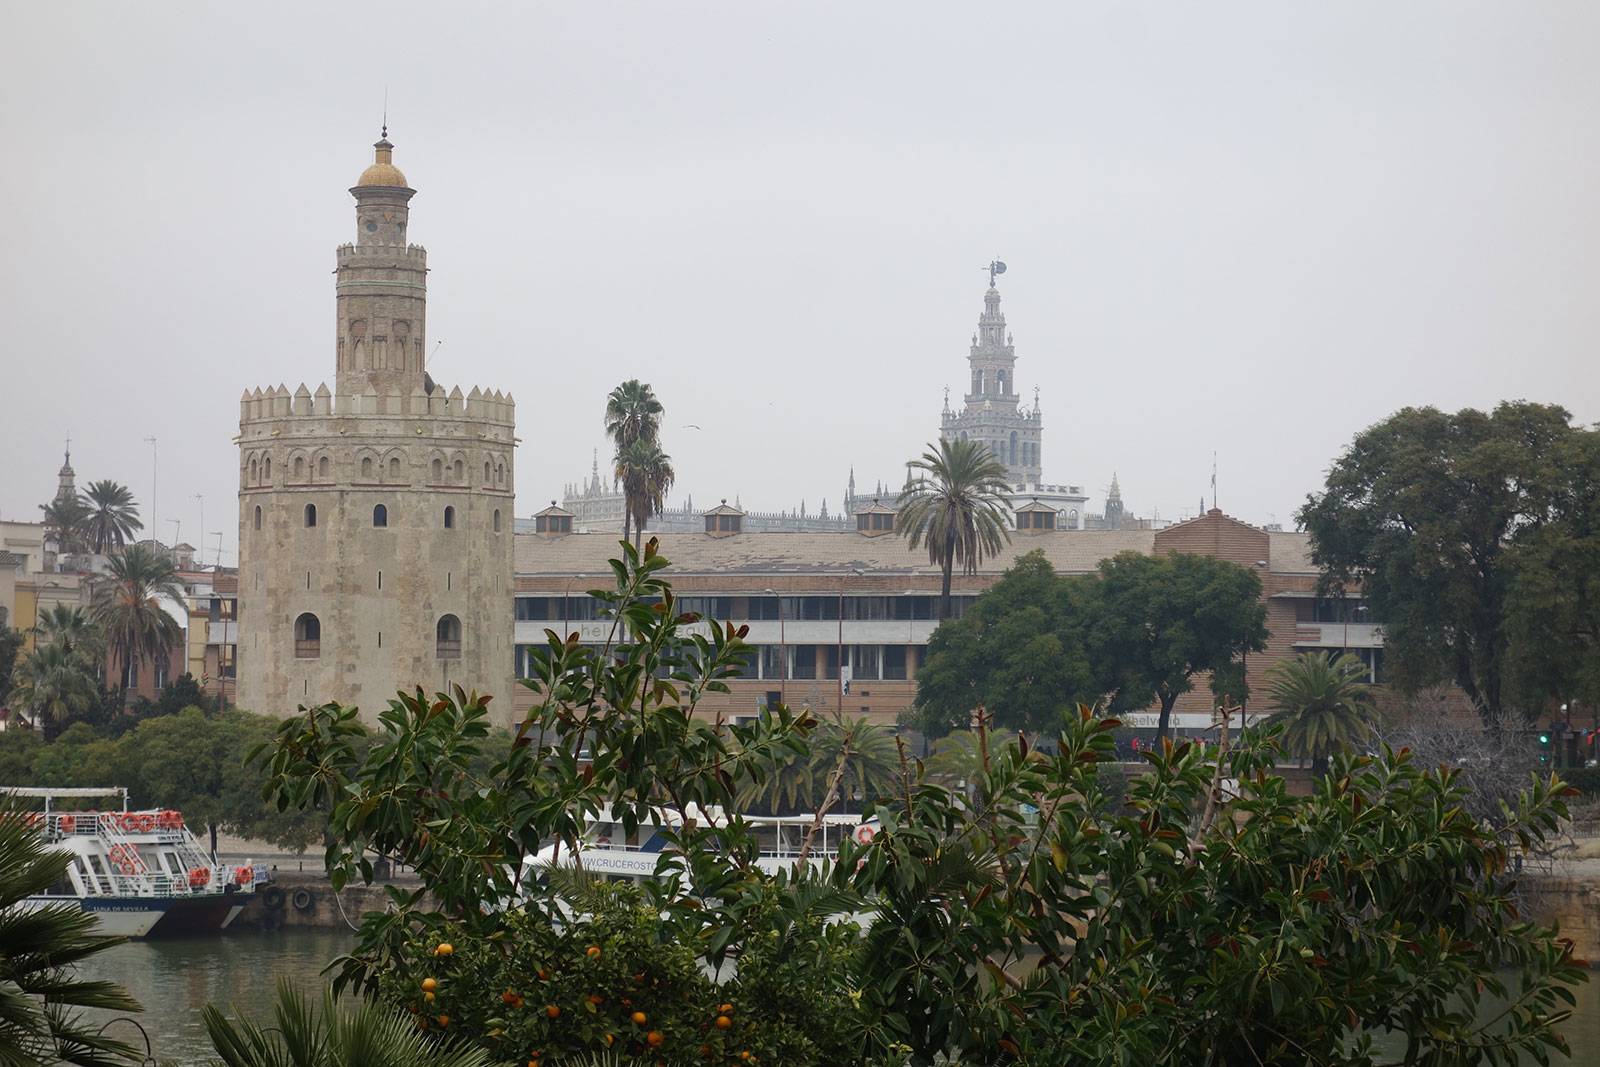 Torre del Oro and the Seville skyline